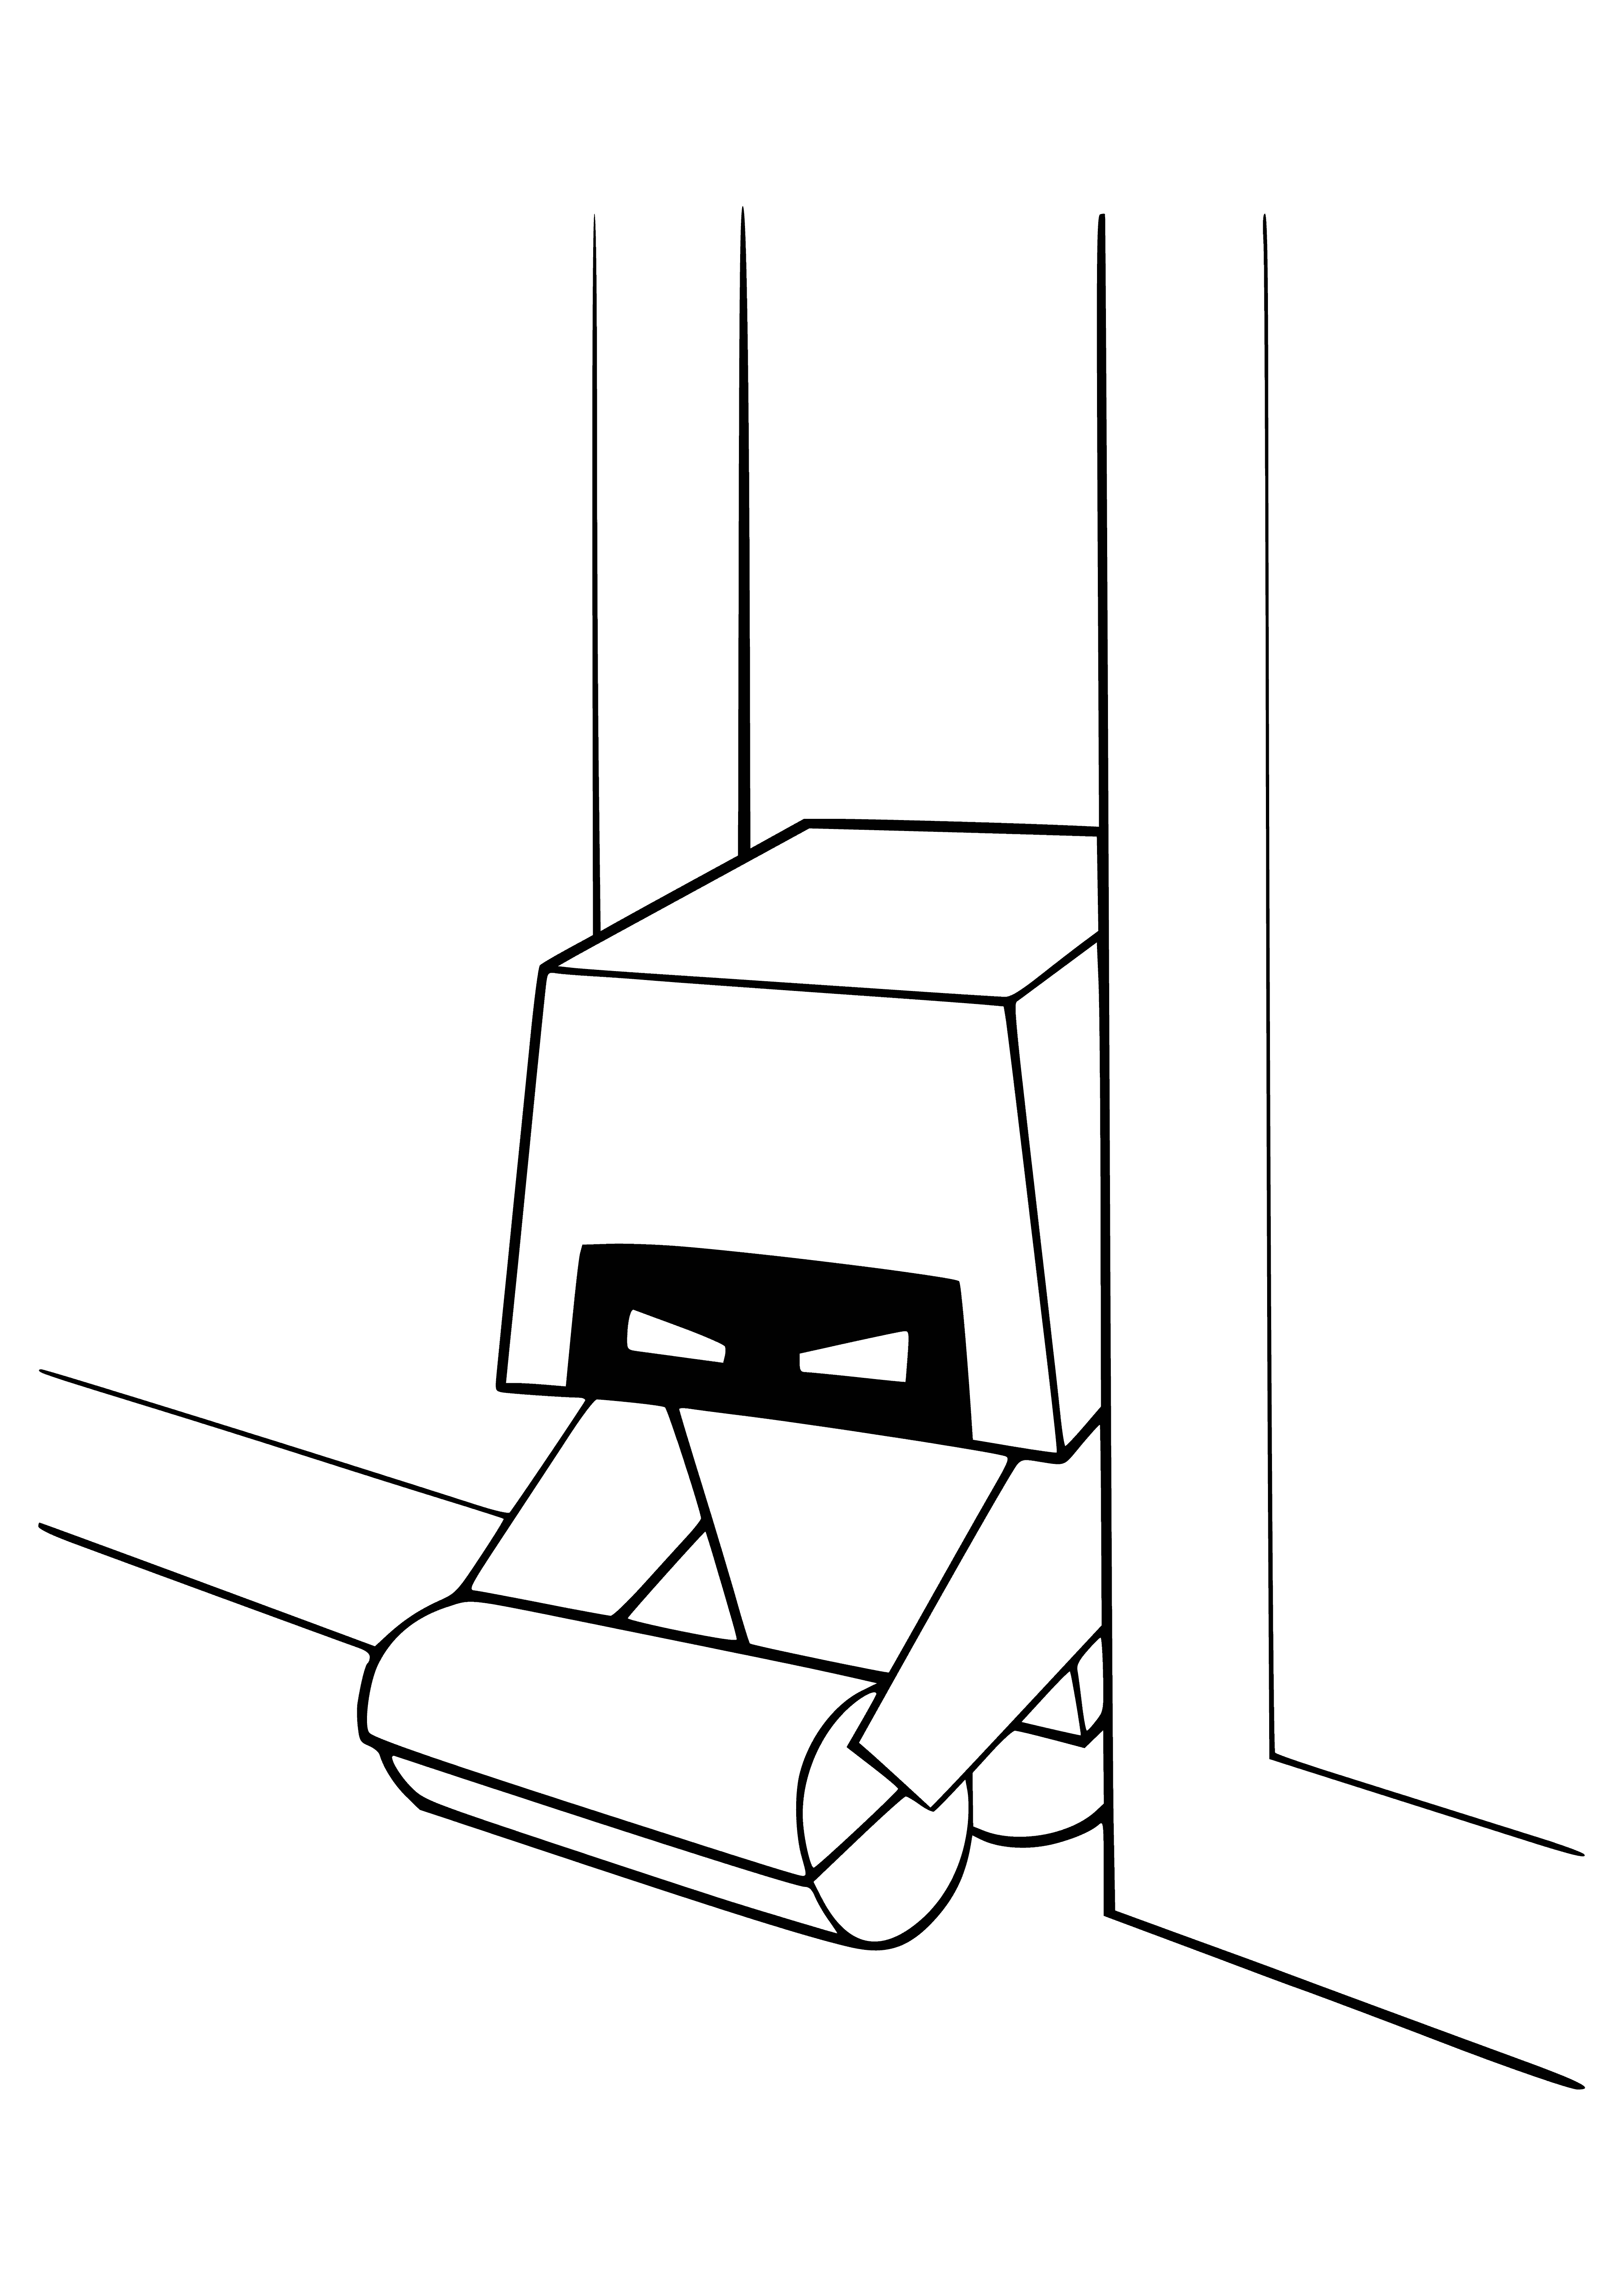 coloring page: Robot with long neck and small body holds broom and dustpan in its two hands, while a green light shines on its head.